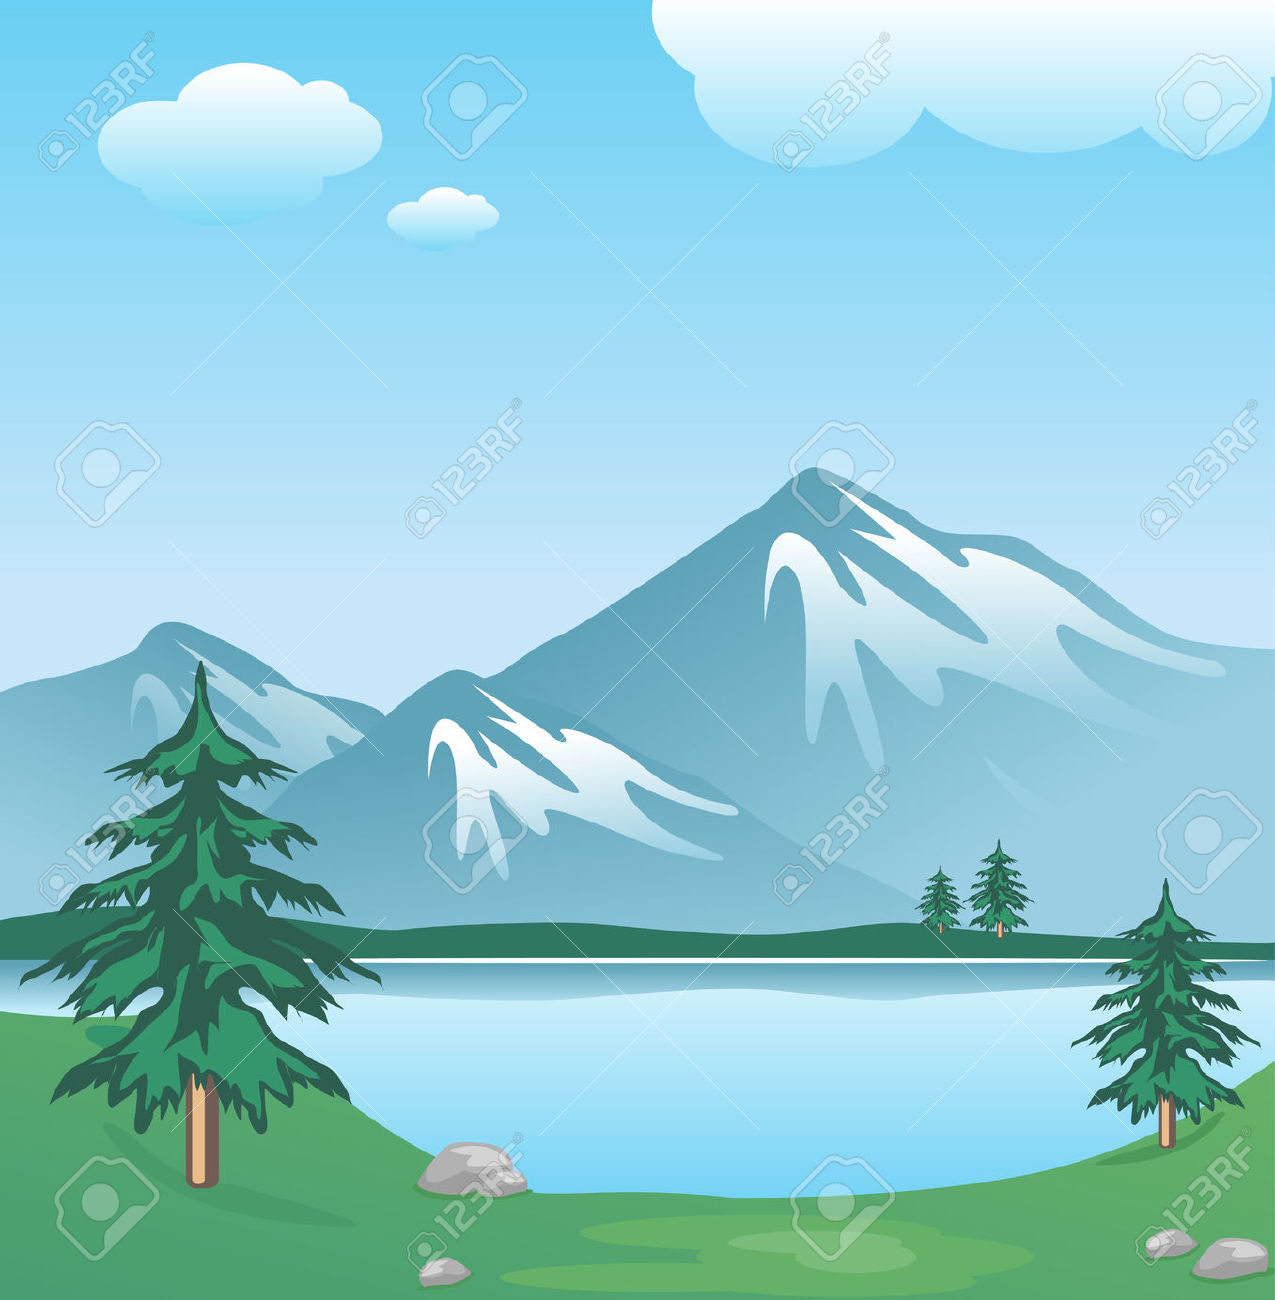 Free Lake Clipart, Download Free Clip Art, Free Clip Art on.